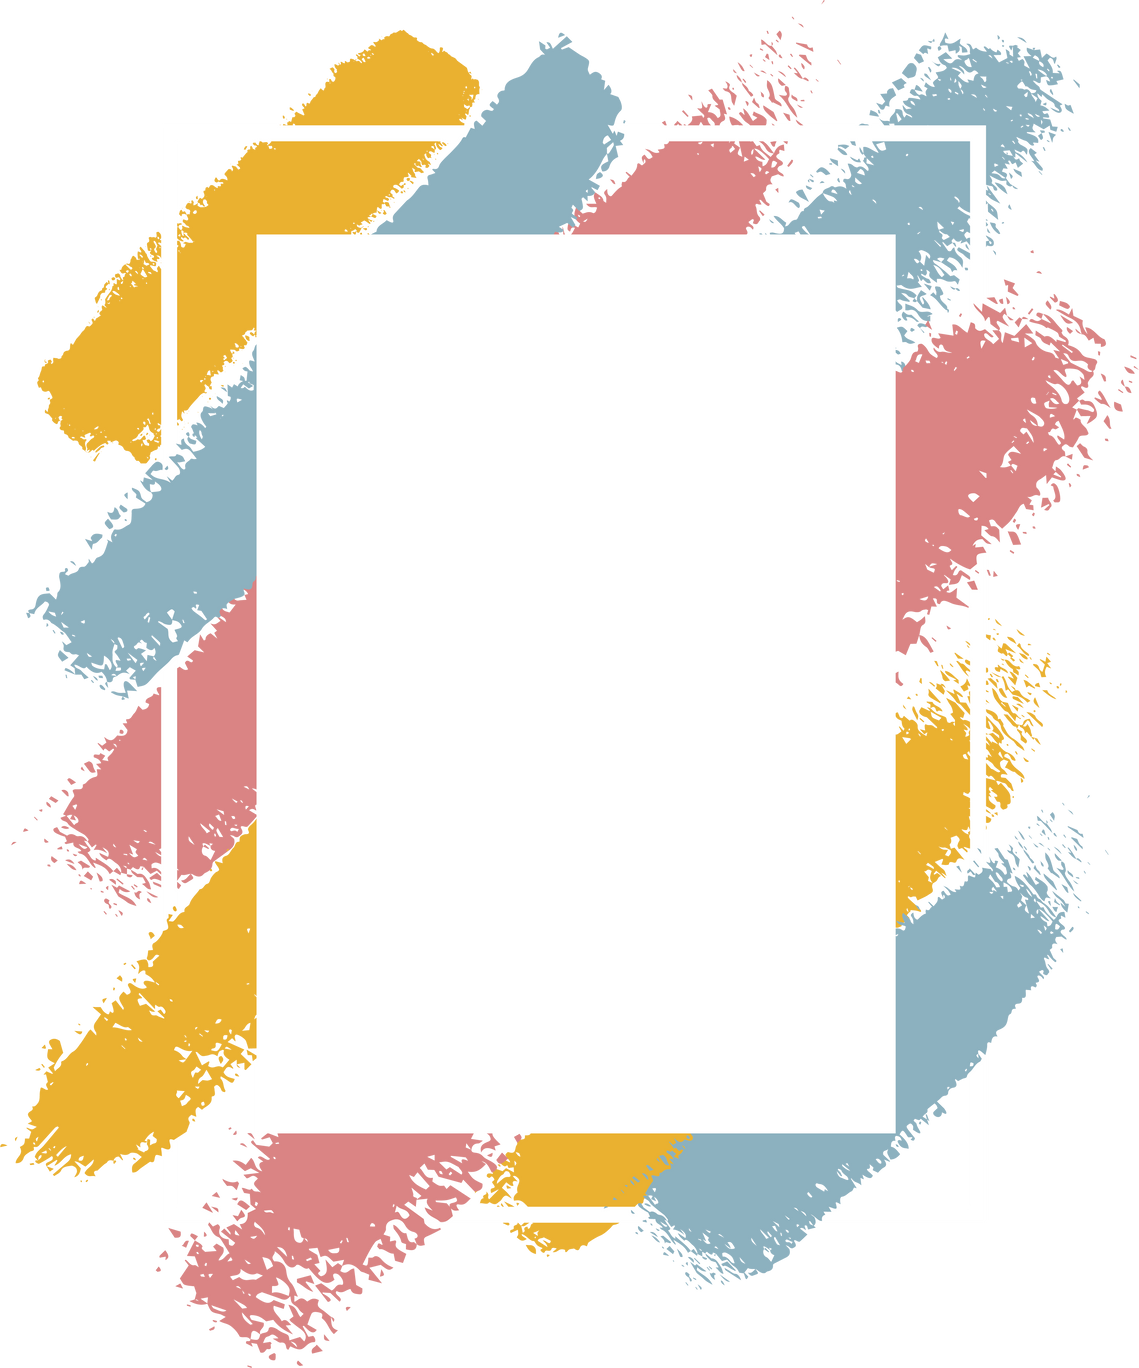 Abstract Frame Design